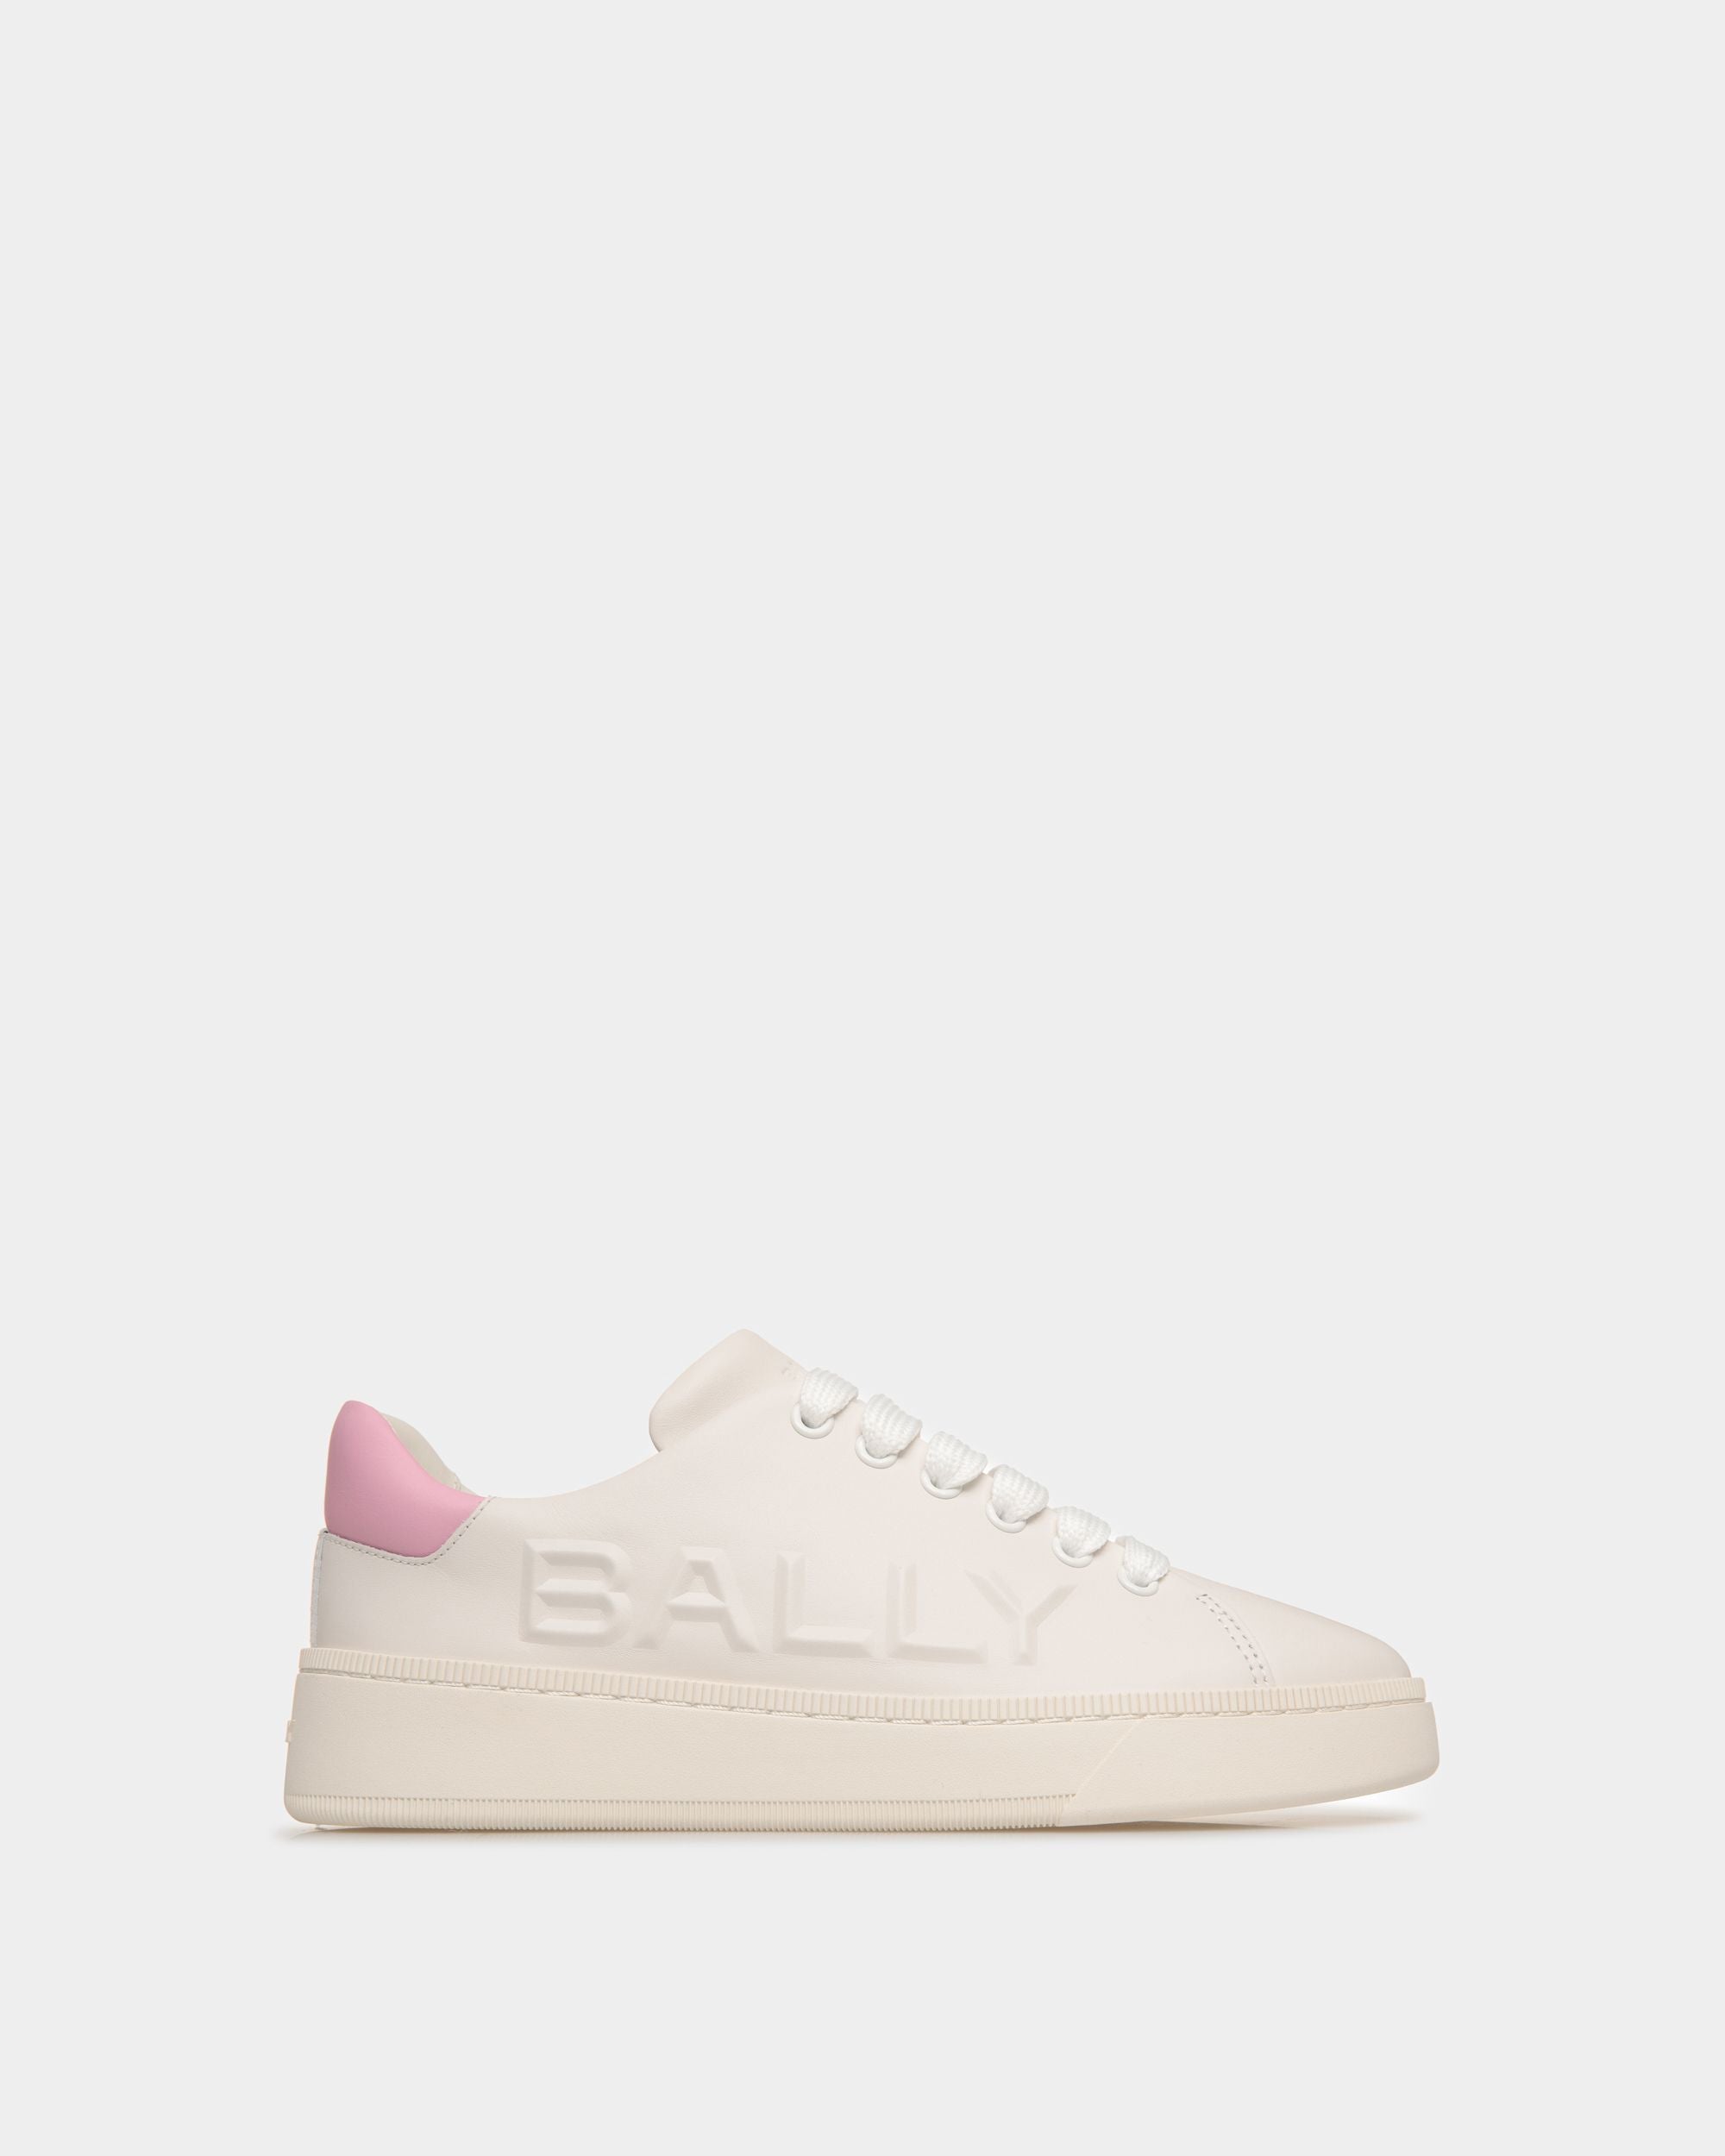 Raise | Women's Sneaker in White And Pink Leather | Bally | Still Life Side